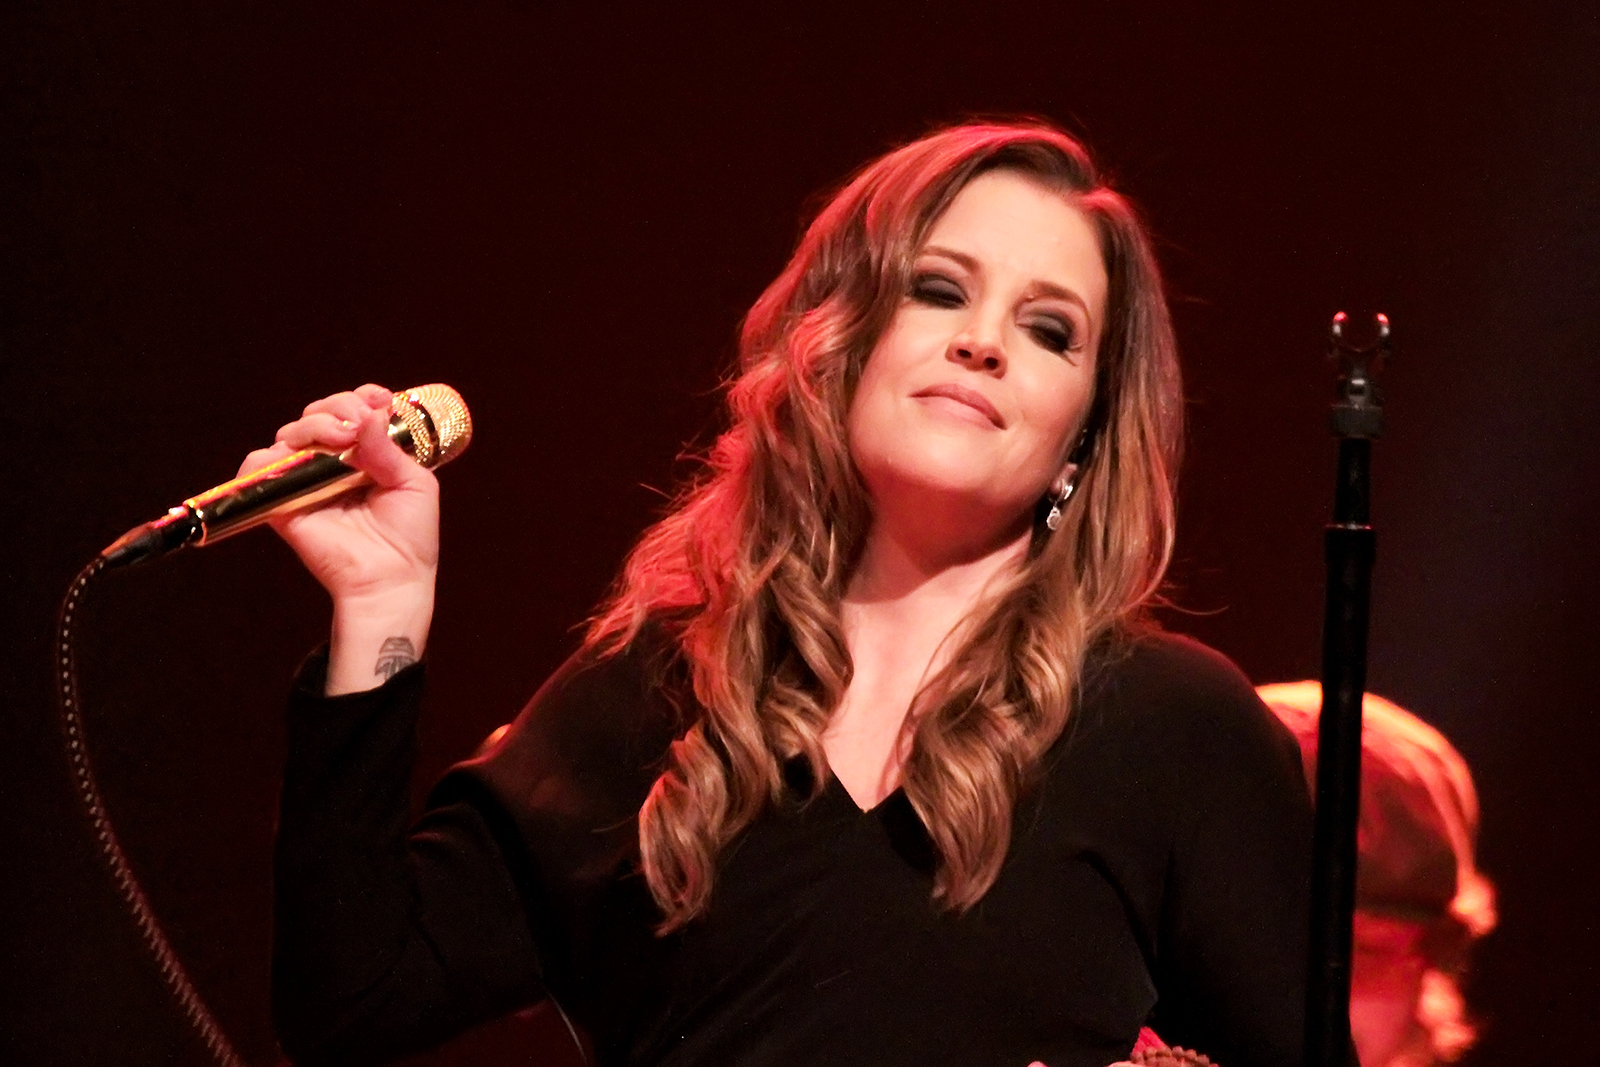 Lisa Marie Presley performs during a concert at the Trump Taj Mahal in Atlantic City, New Jersey on Nov. 10, 2012.